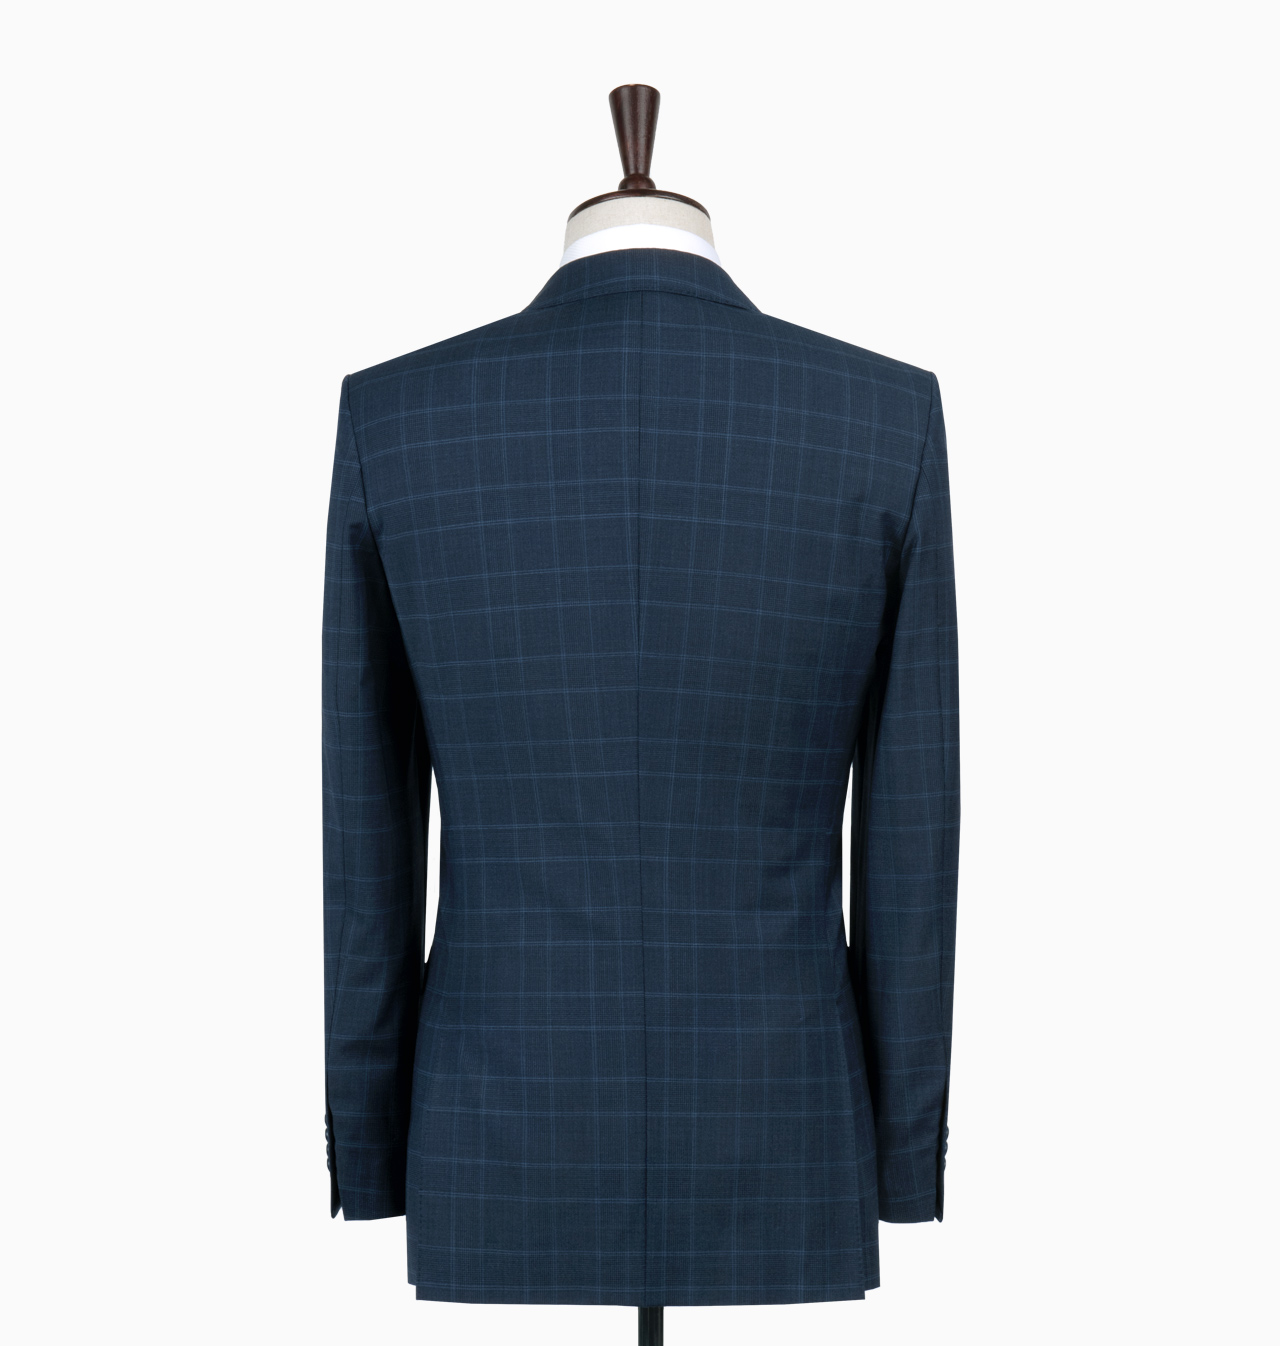 Blue Glen Check / S1580 - Suiting